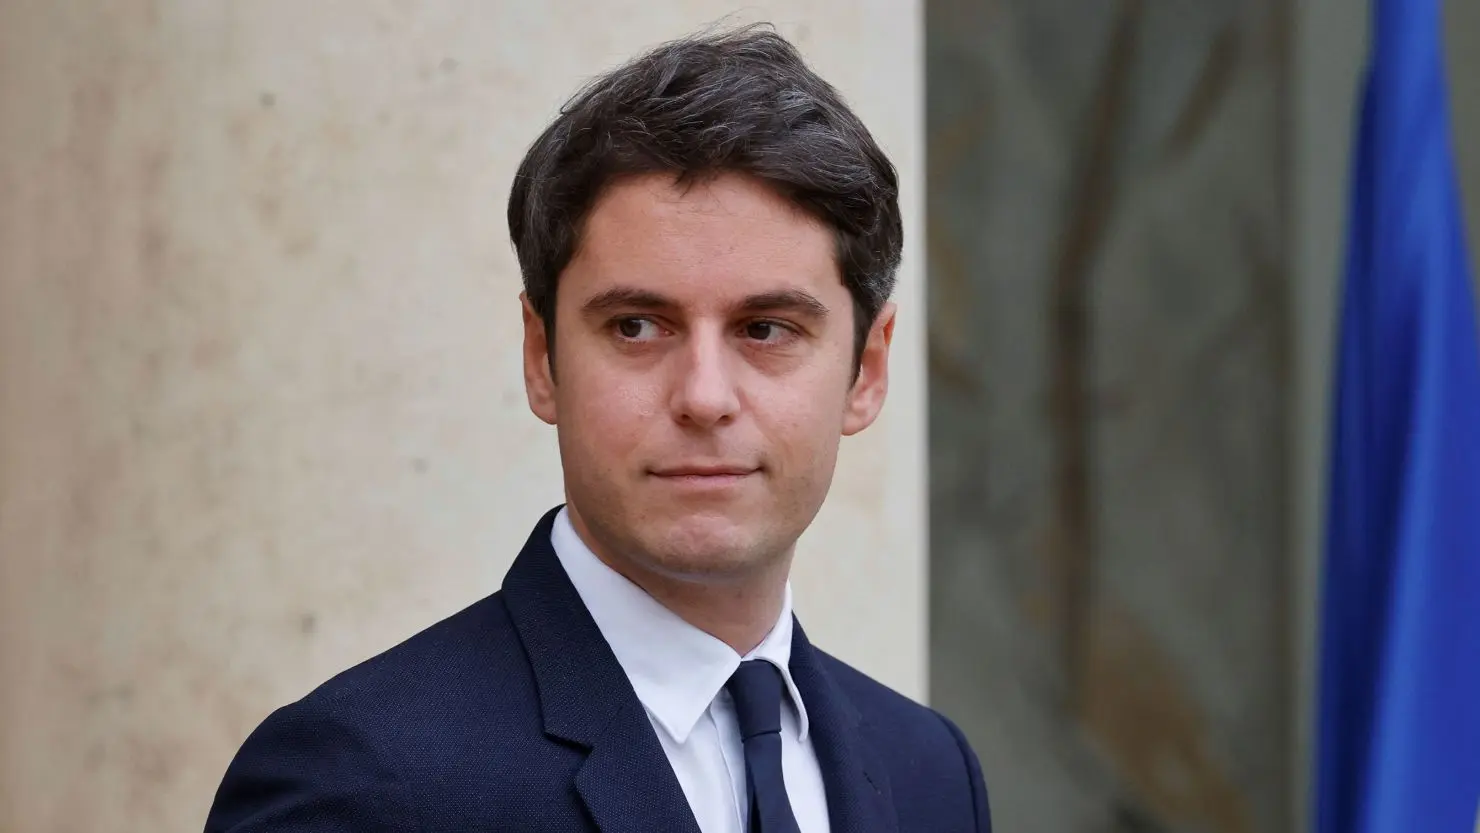 34 Year Old, Attal Appointed Youngest French Prime Minister